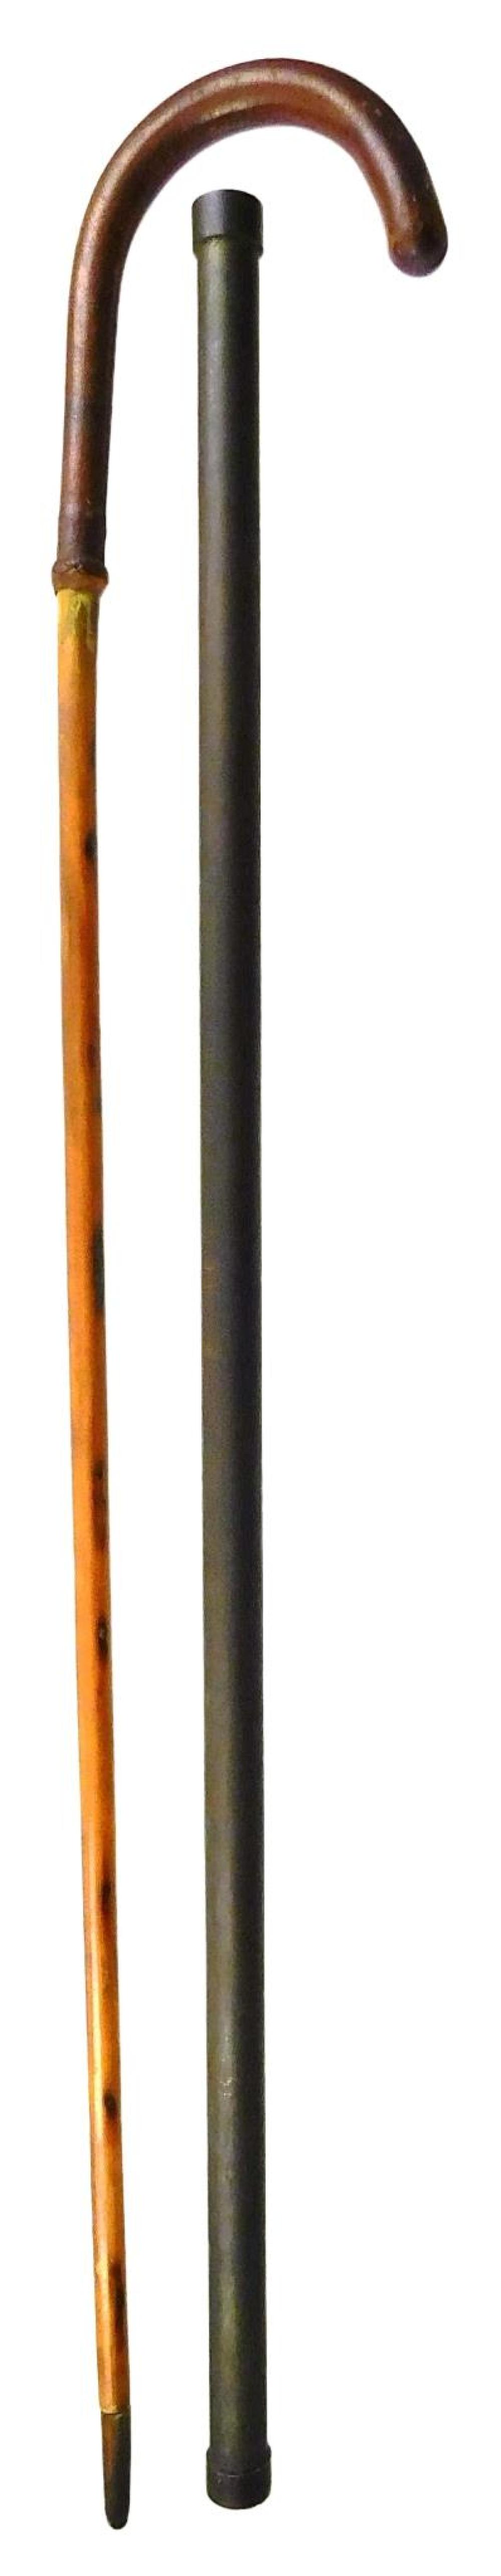 WALKING STICK WITH CURVED HANDLE 30928b